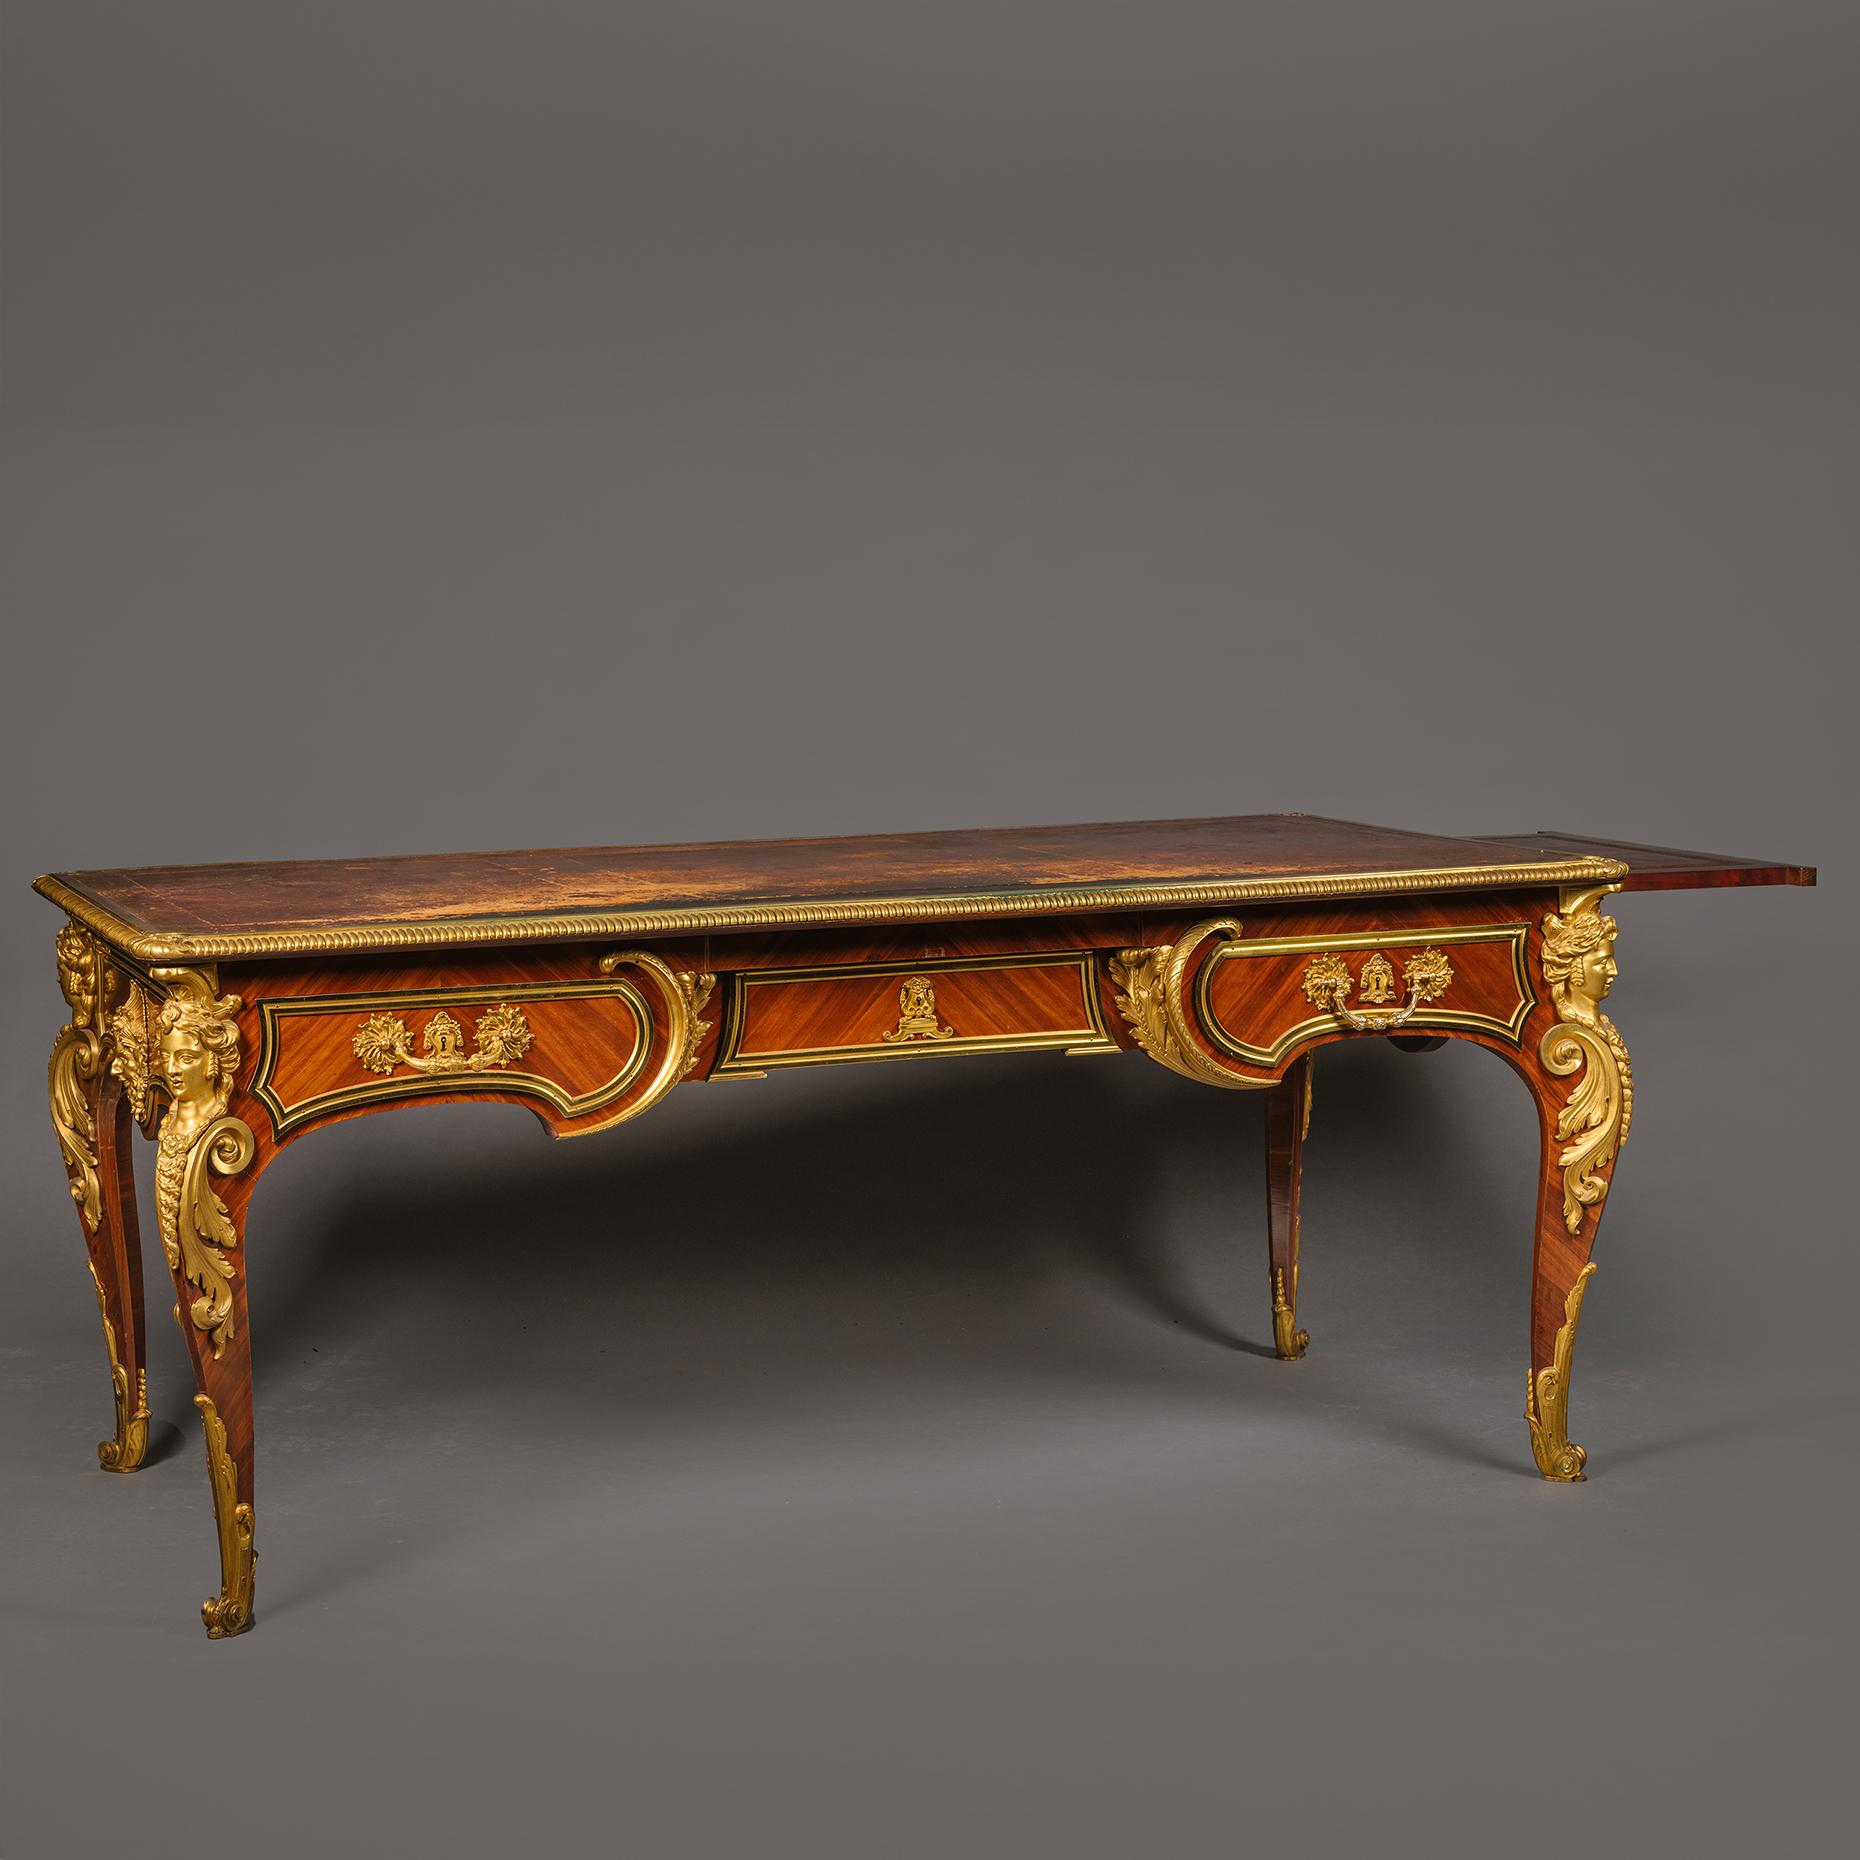 A Louis XIV Style Gilt-Bronze Mounted Mahogany Bureau Plat, By Cueunières, Paris. After the Model by Charles Cressent. 

Stamped to underside 'L. CUEUNIERES JNE / ÉBÉNISTE'

The original gilt-embossed tan leather top surround by an oval moulded